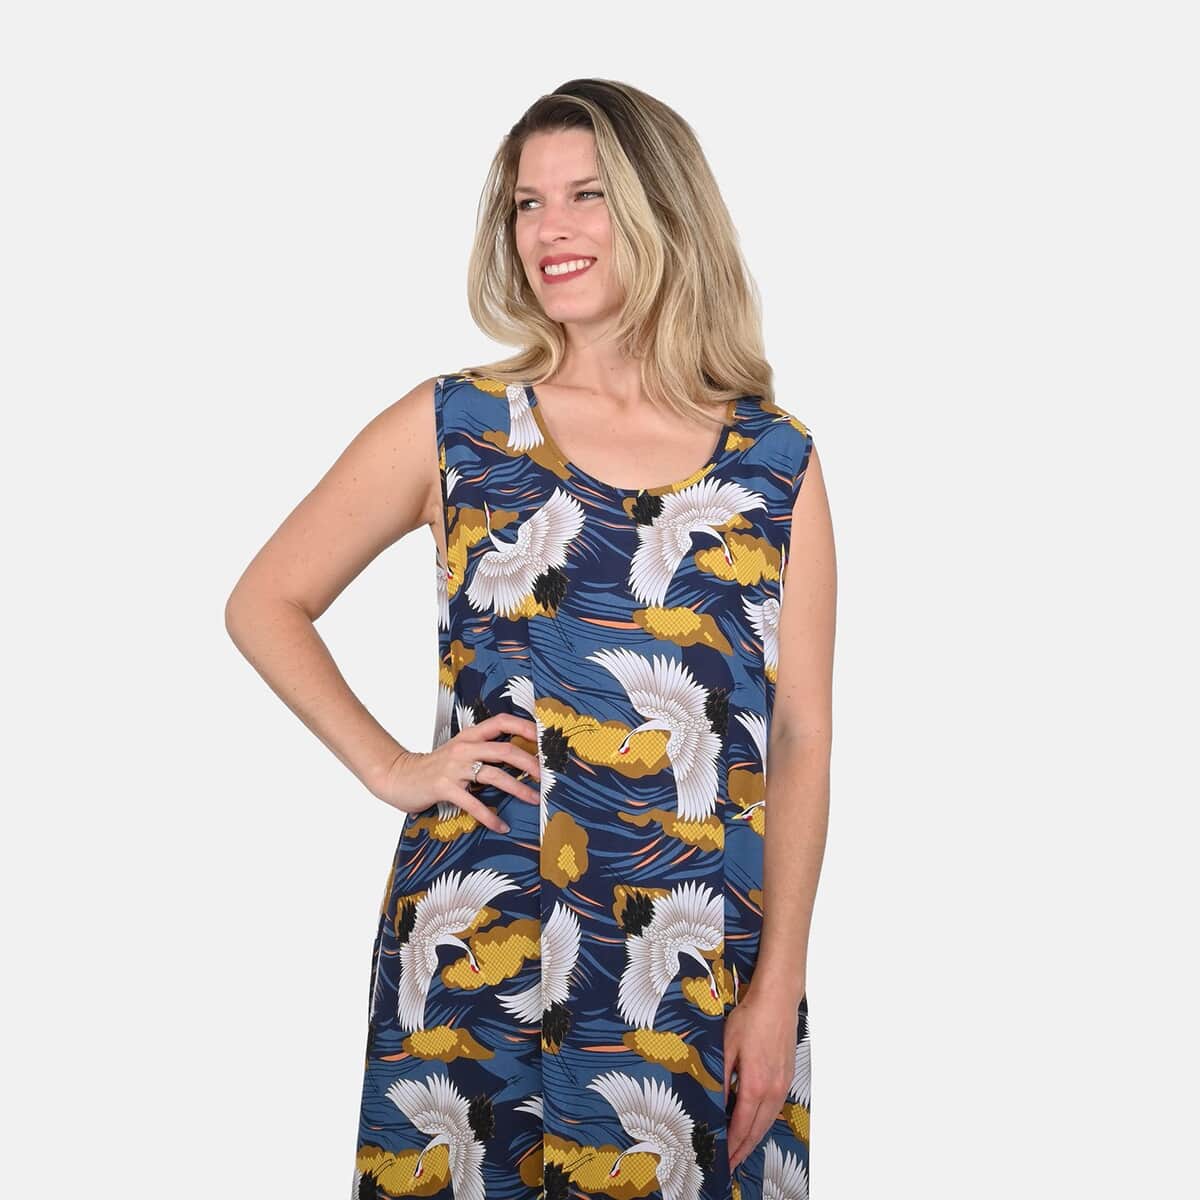 TAMSY Blue Bird A-Line Midi Dress - One Size Fits Most (48.8"x49.2") image number 3